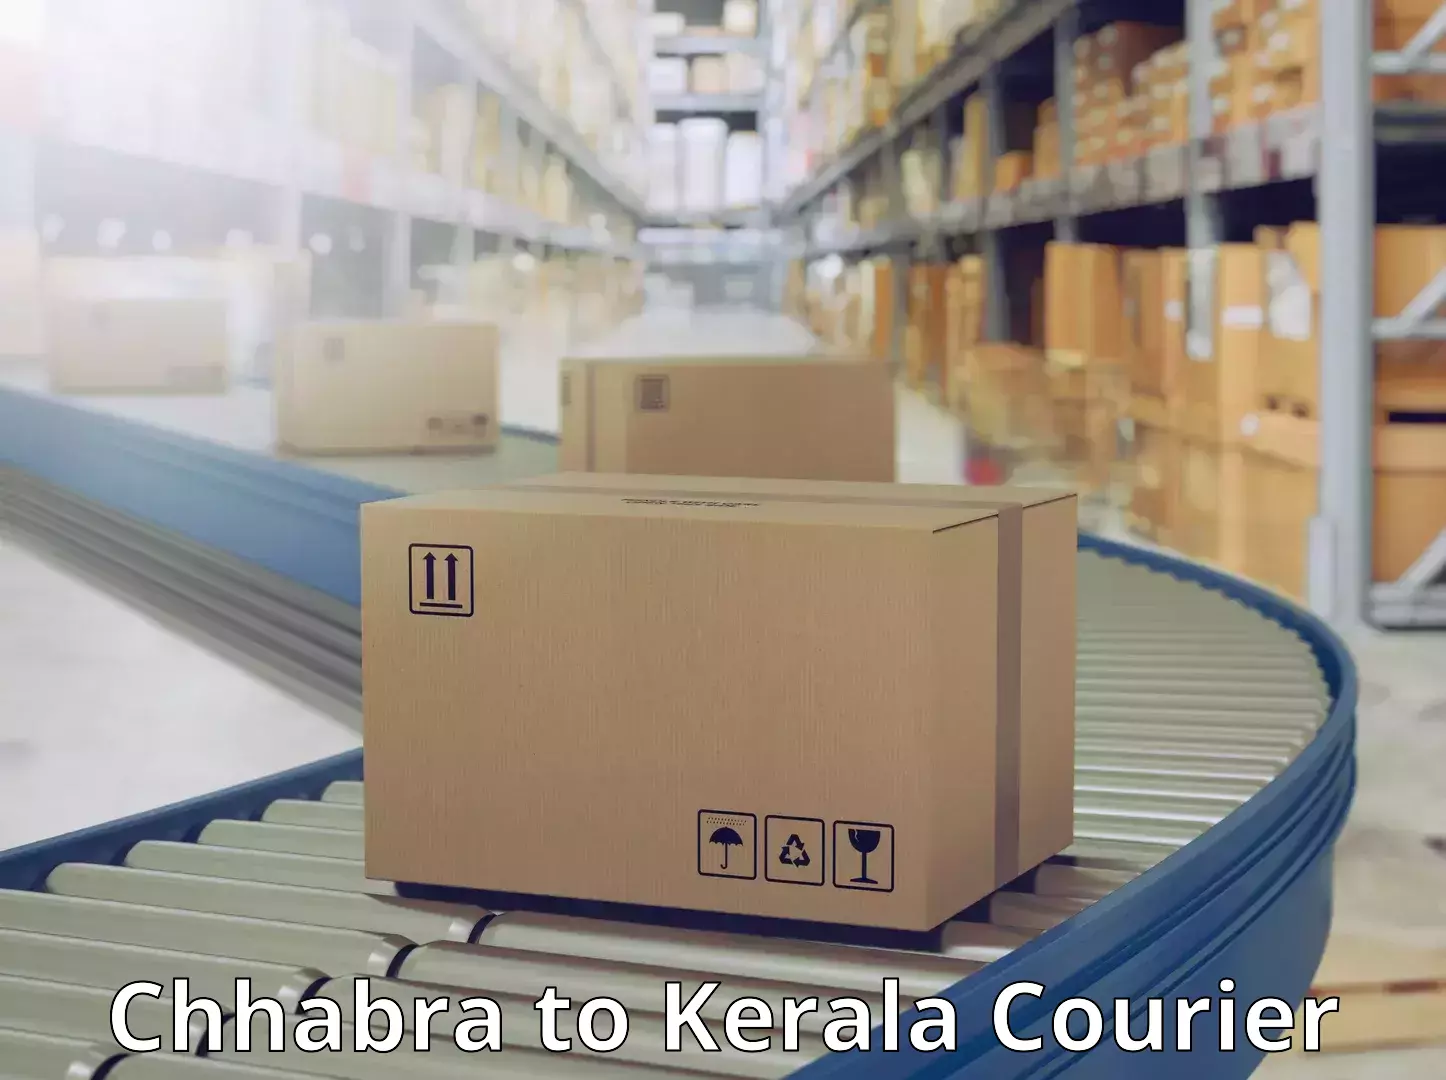 State-of-the-art courier technology Chhabra to Poojapura